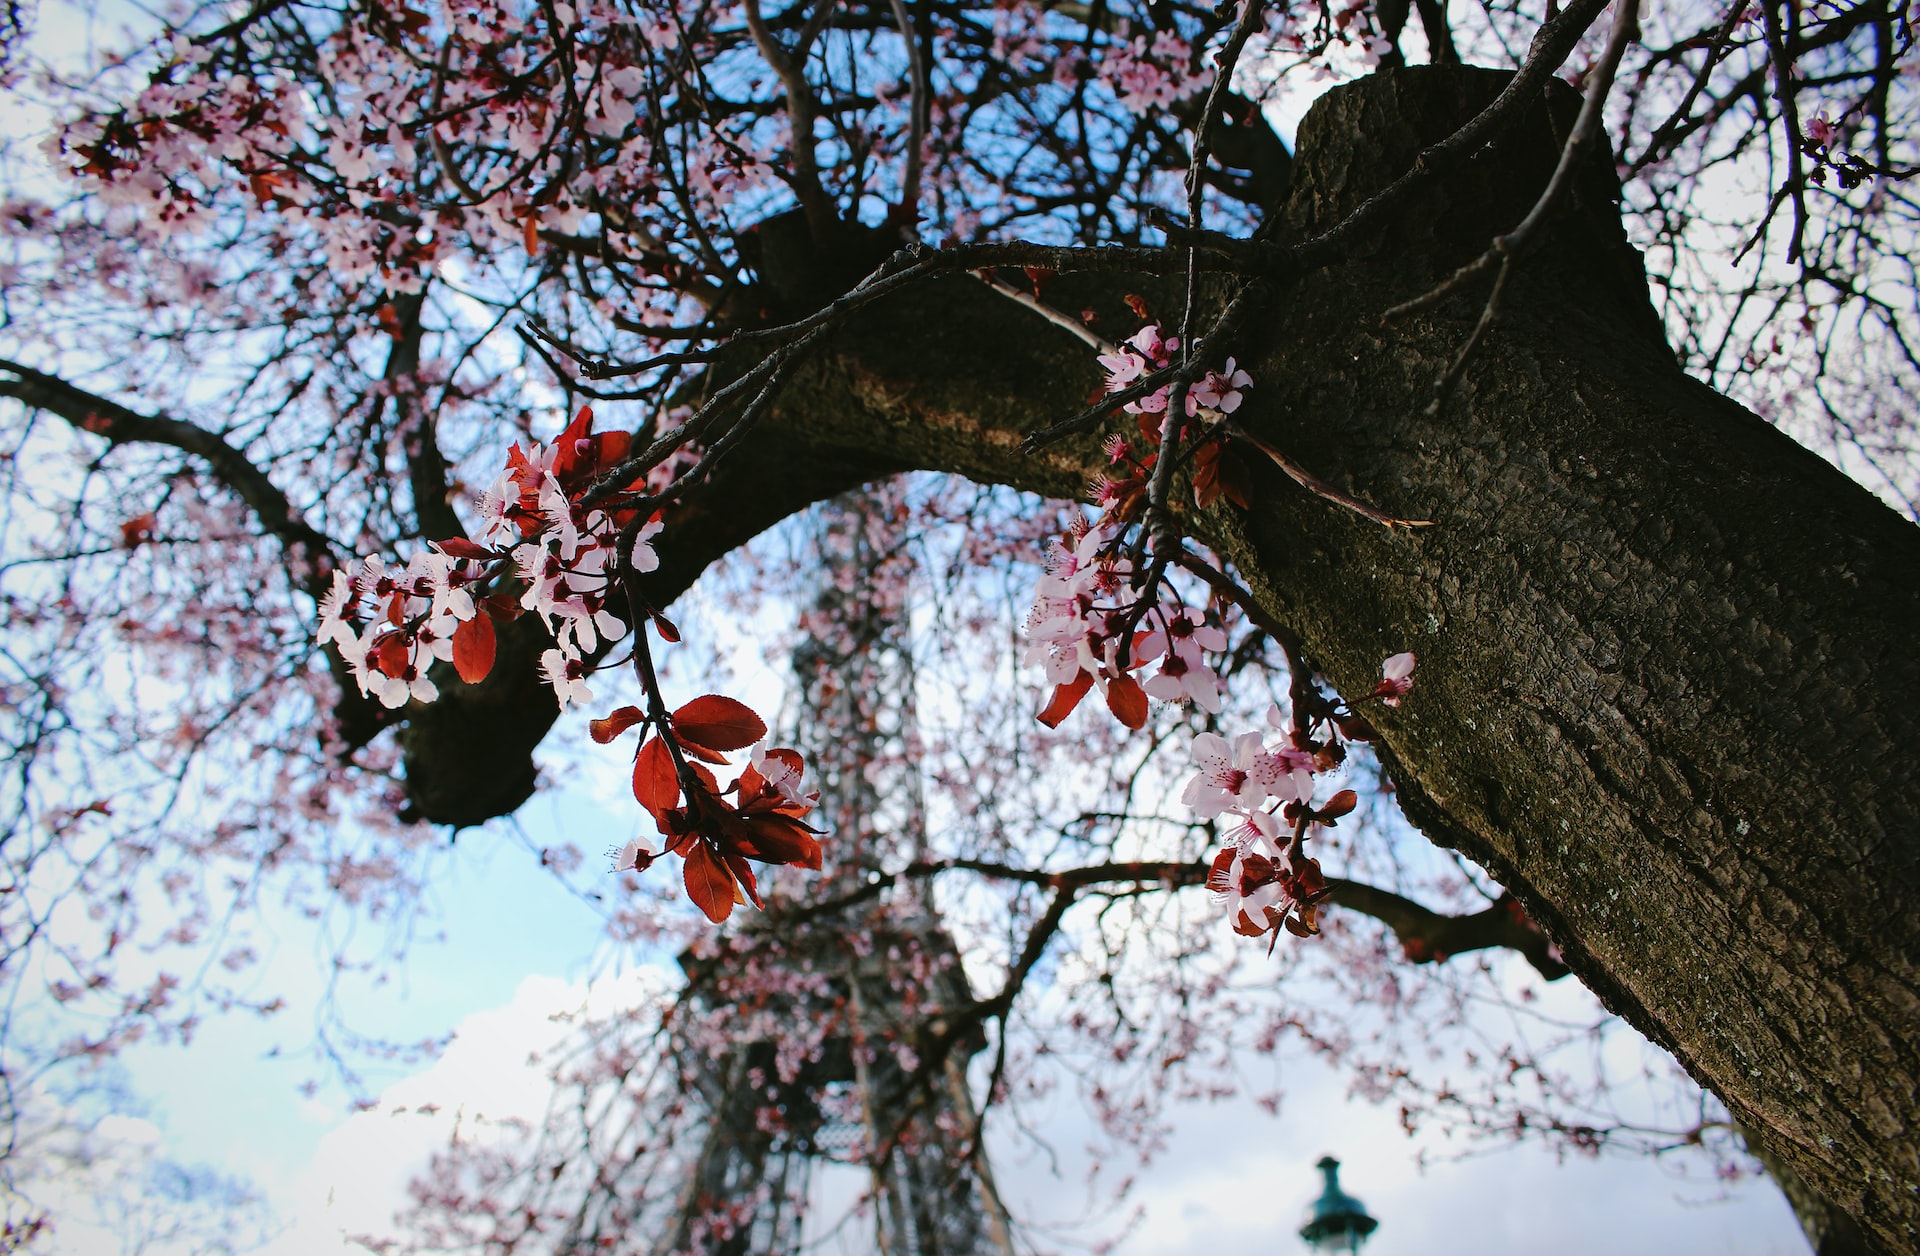 Blossoming flowers in front of the sublime Eiffel Tower in the spring.